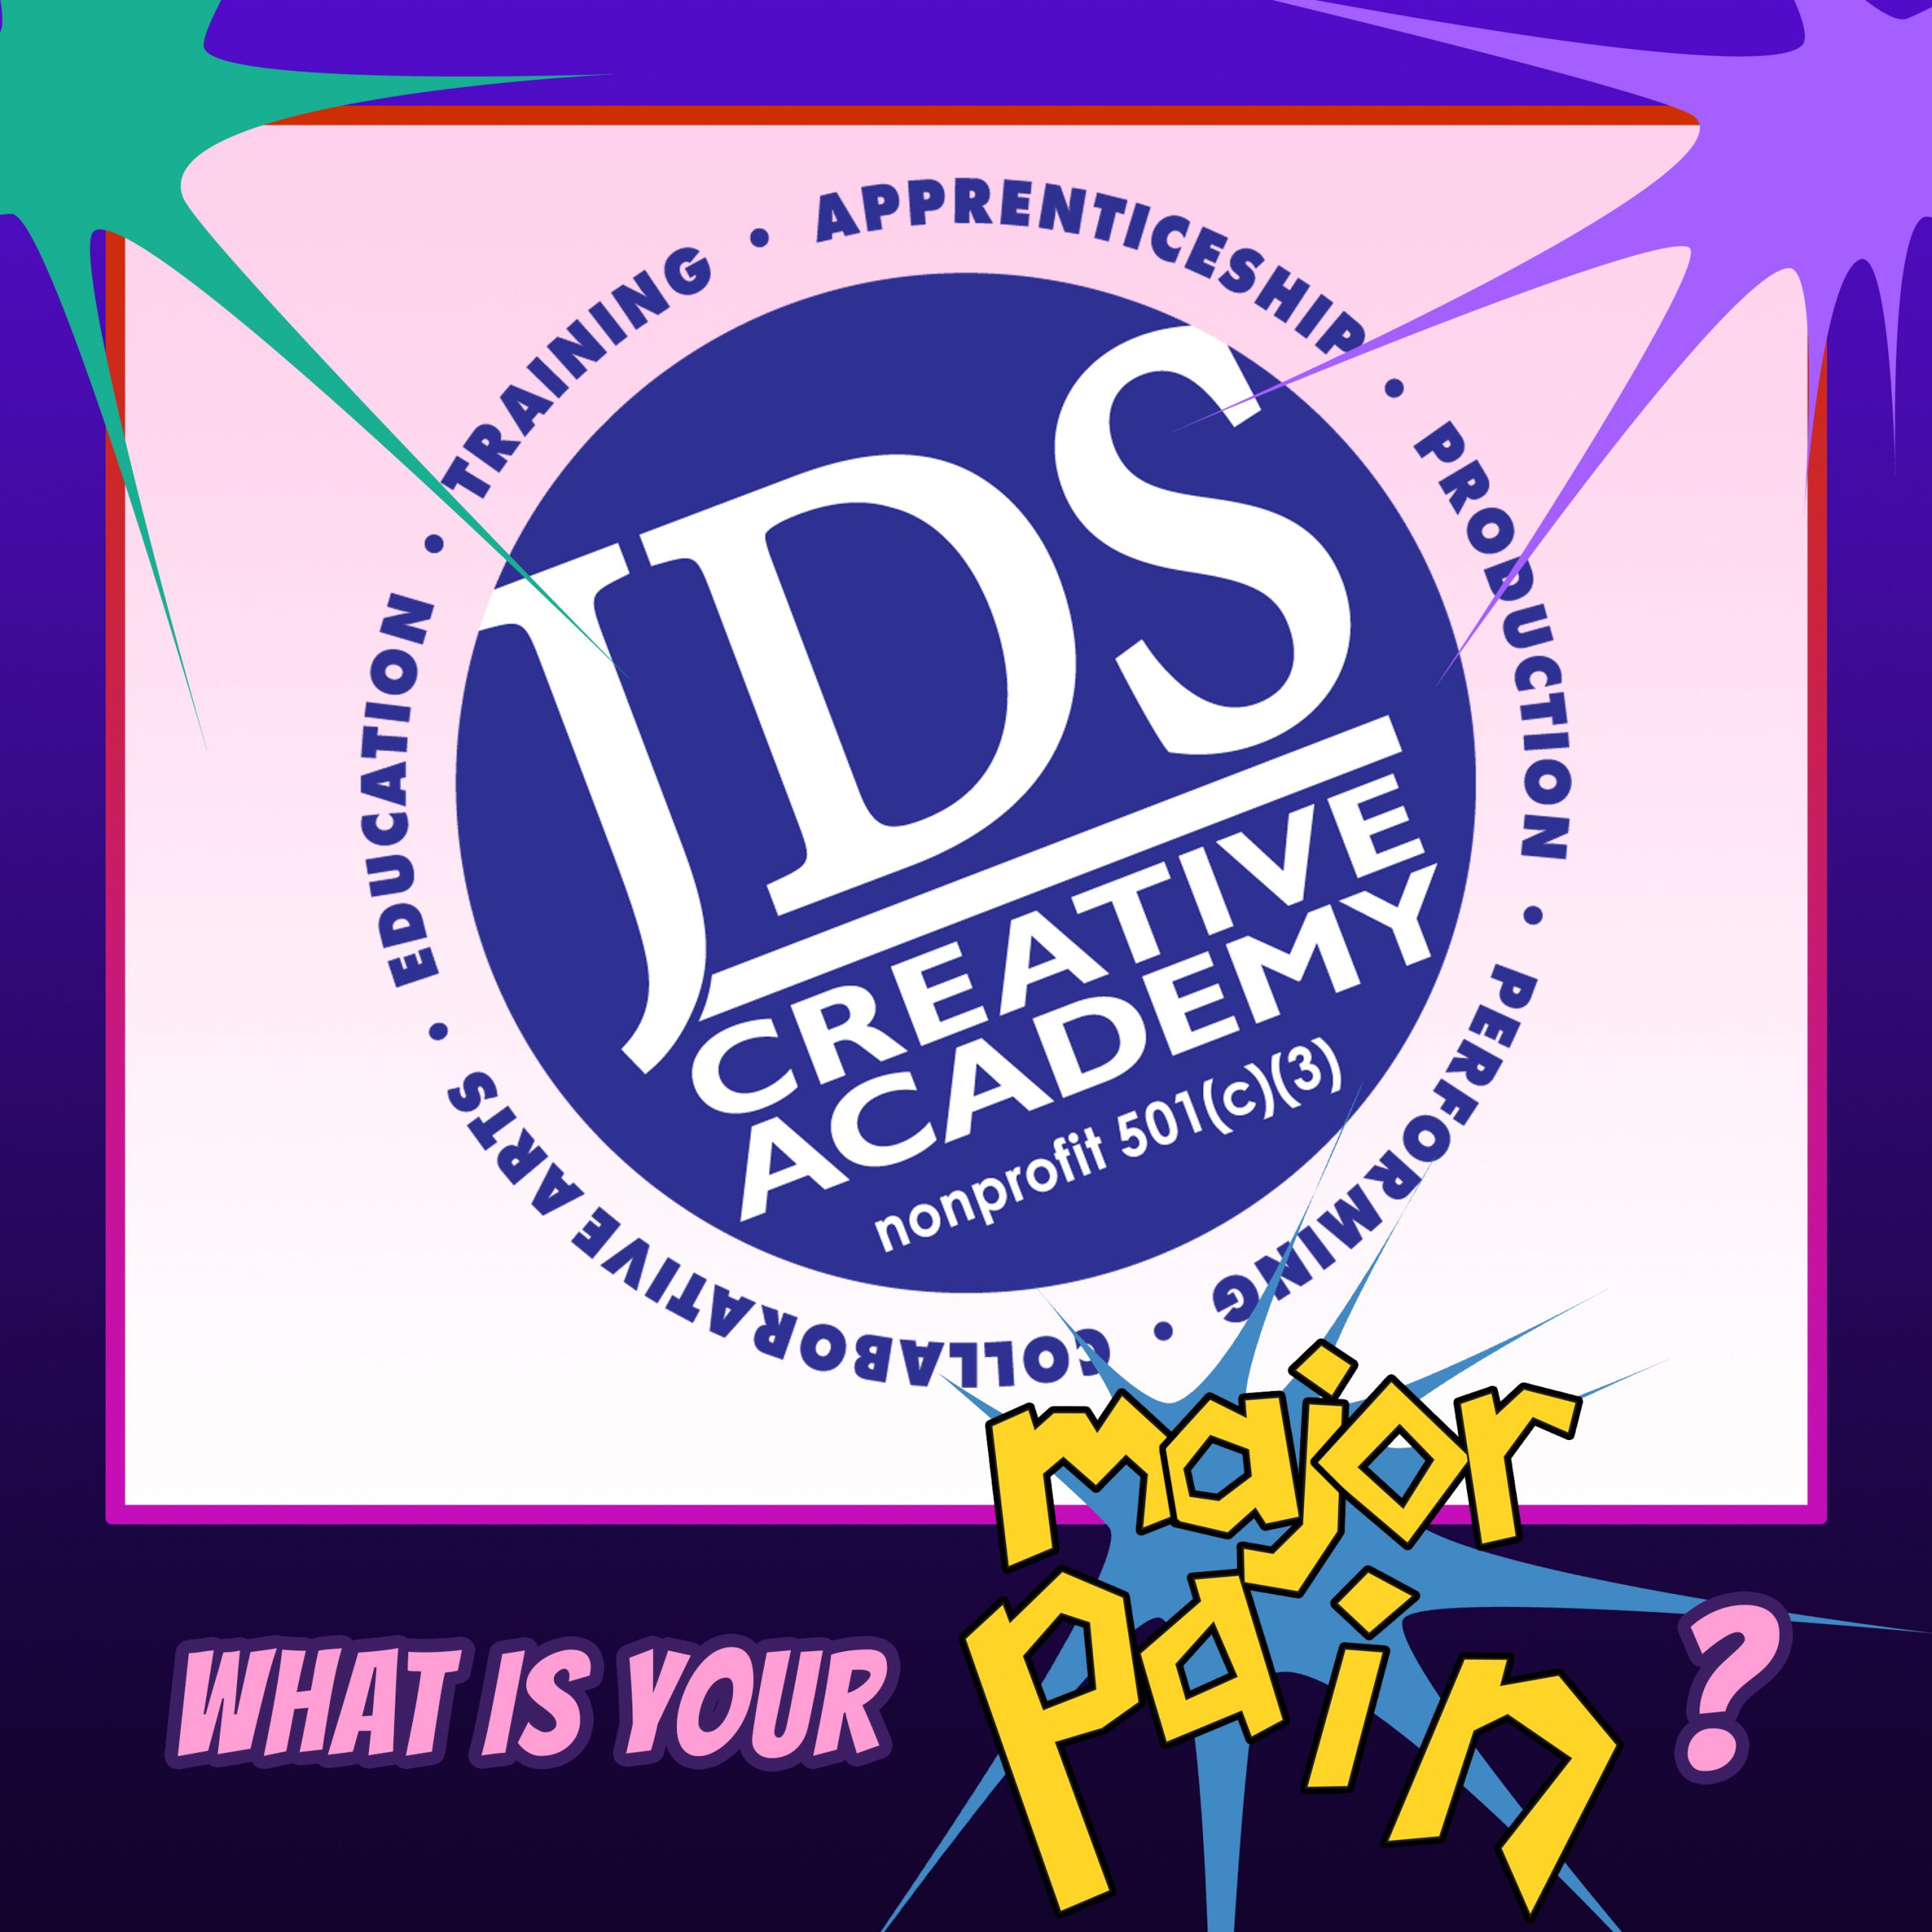 JDS Creative Academy: Empowering Creativity and Disability Inclusion